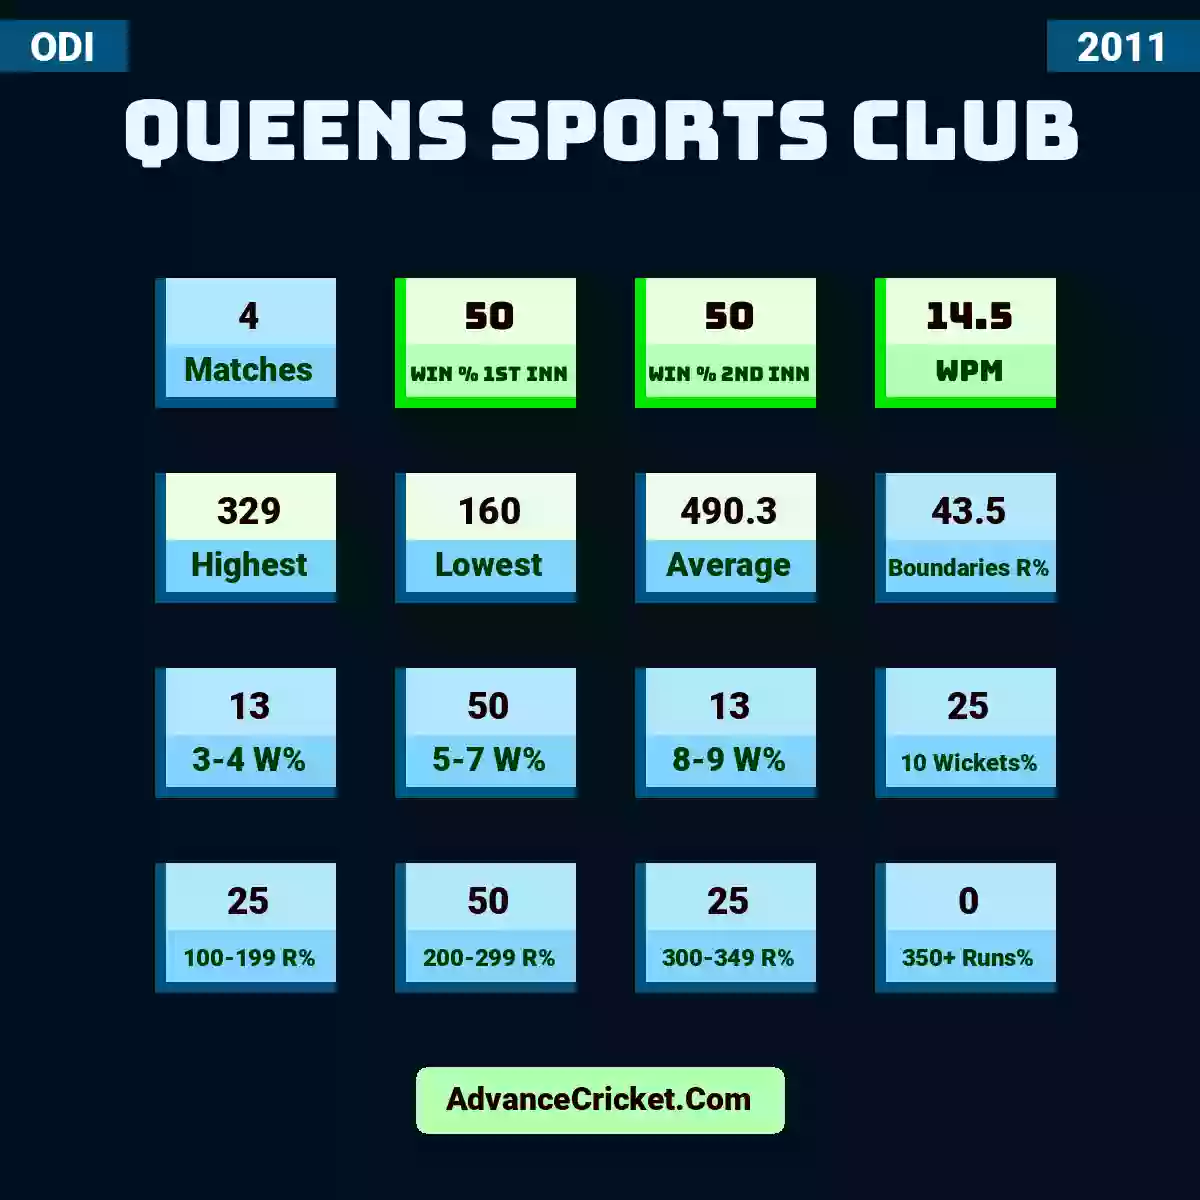 Image showing Queens Sports Club with Matches: 4, Win % 1st Inn: 50, Win % 2nd Inn: 50, WPM: 14.5, Highest: 329, Lowest: 160, Average: 490.3, Boundaries R%: 43.5, 3-4 W%: 13, 5-7 W%: 50, 8-9 W%: 13, 10 Wickets%: 25, 100-199 R%: 25, 200-299 R%: 50, 300-349 R%: 25, 350+ Runs%: 0.